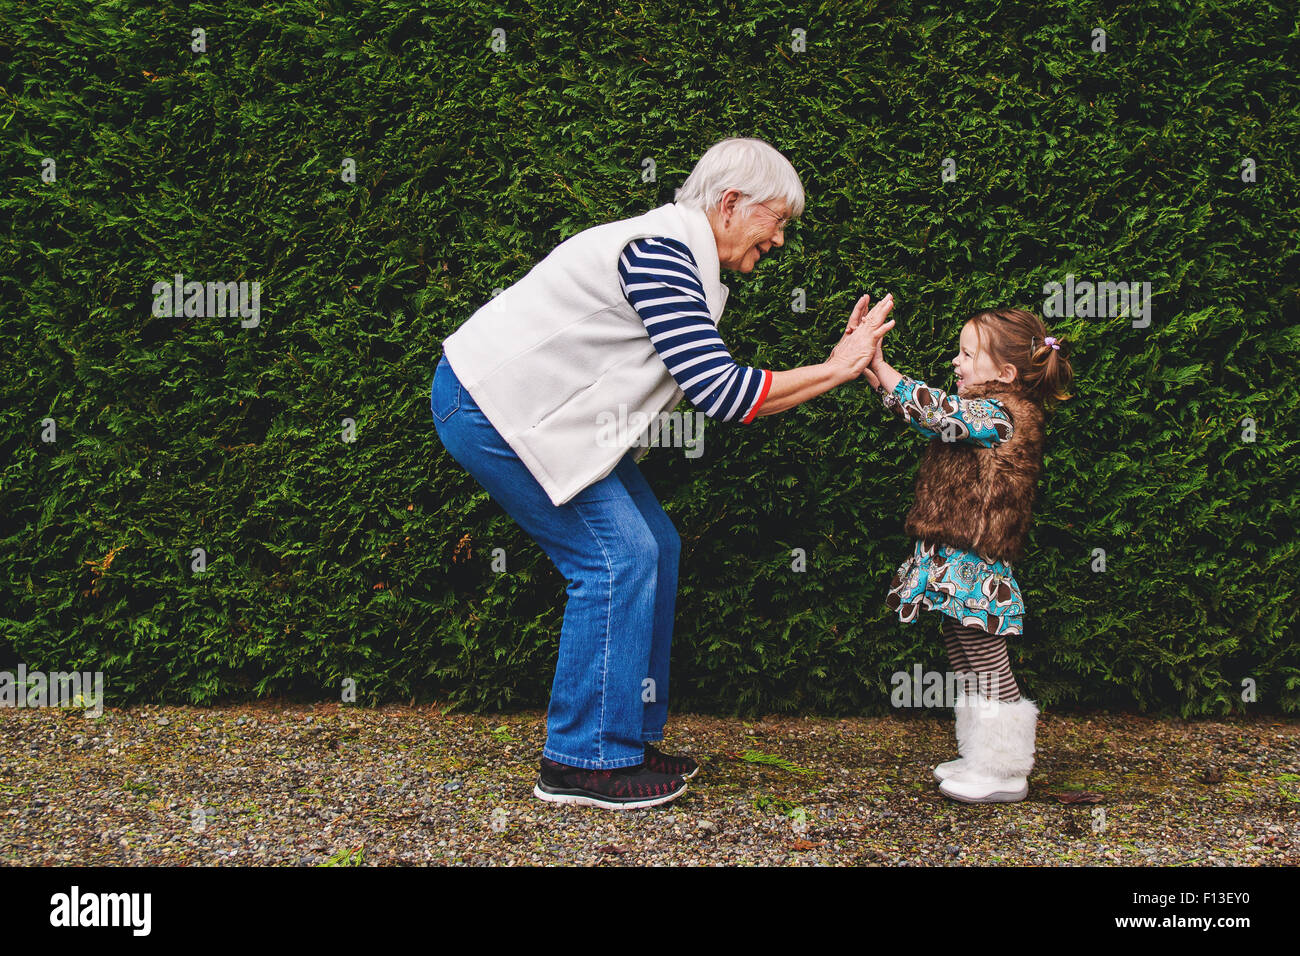 Girl playing pat-a-cake with her grandmother Stock Photo